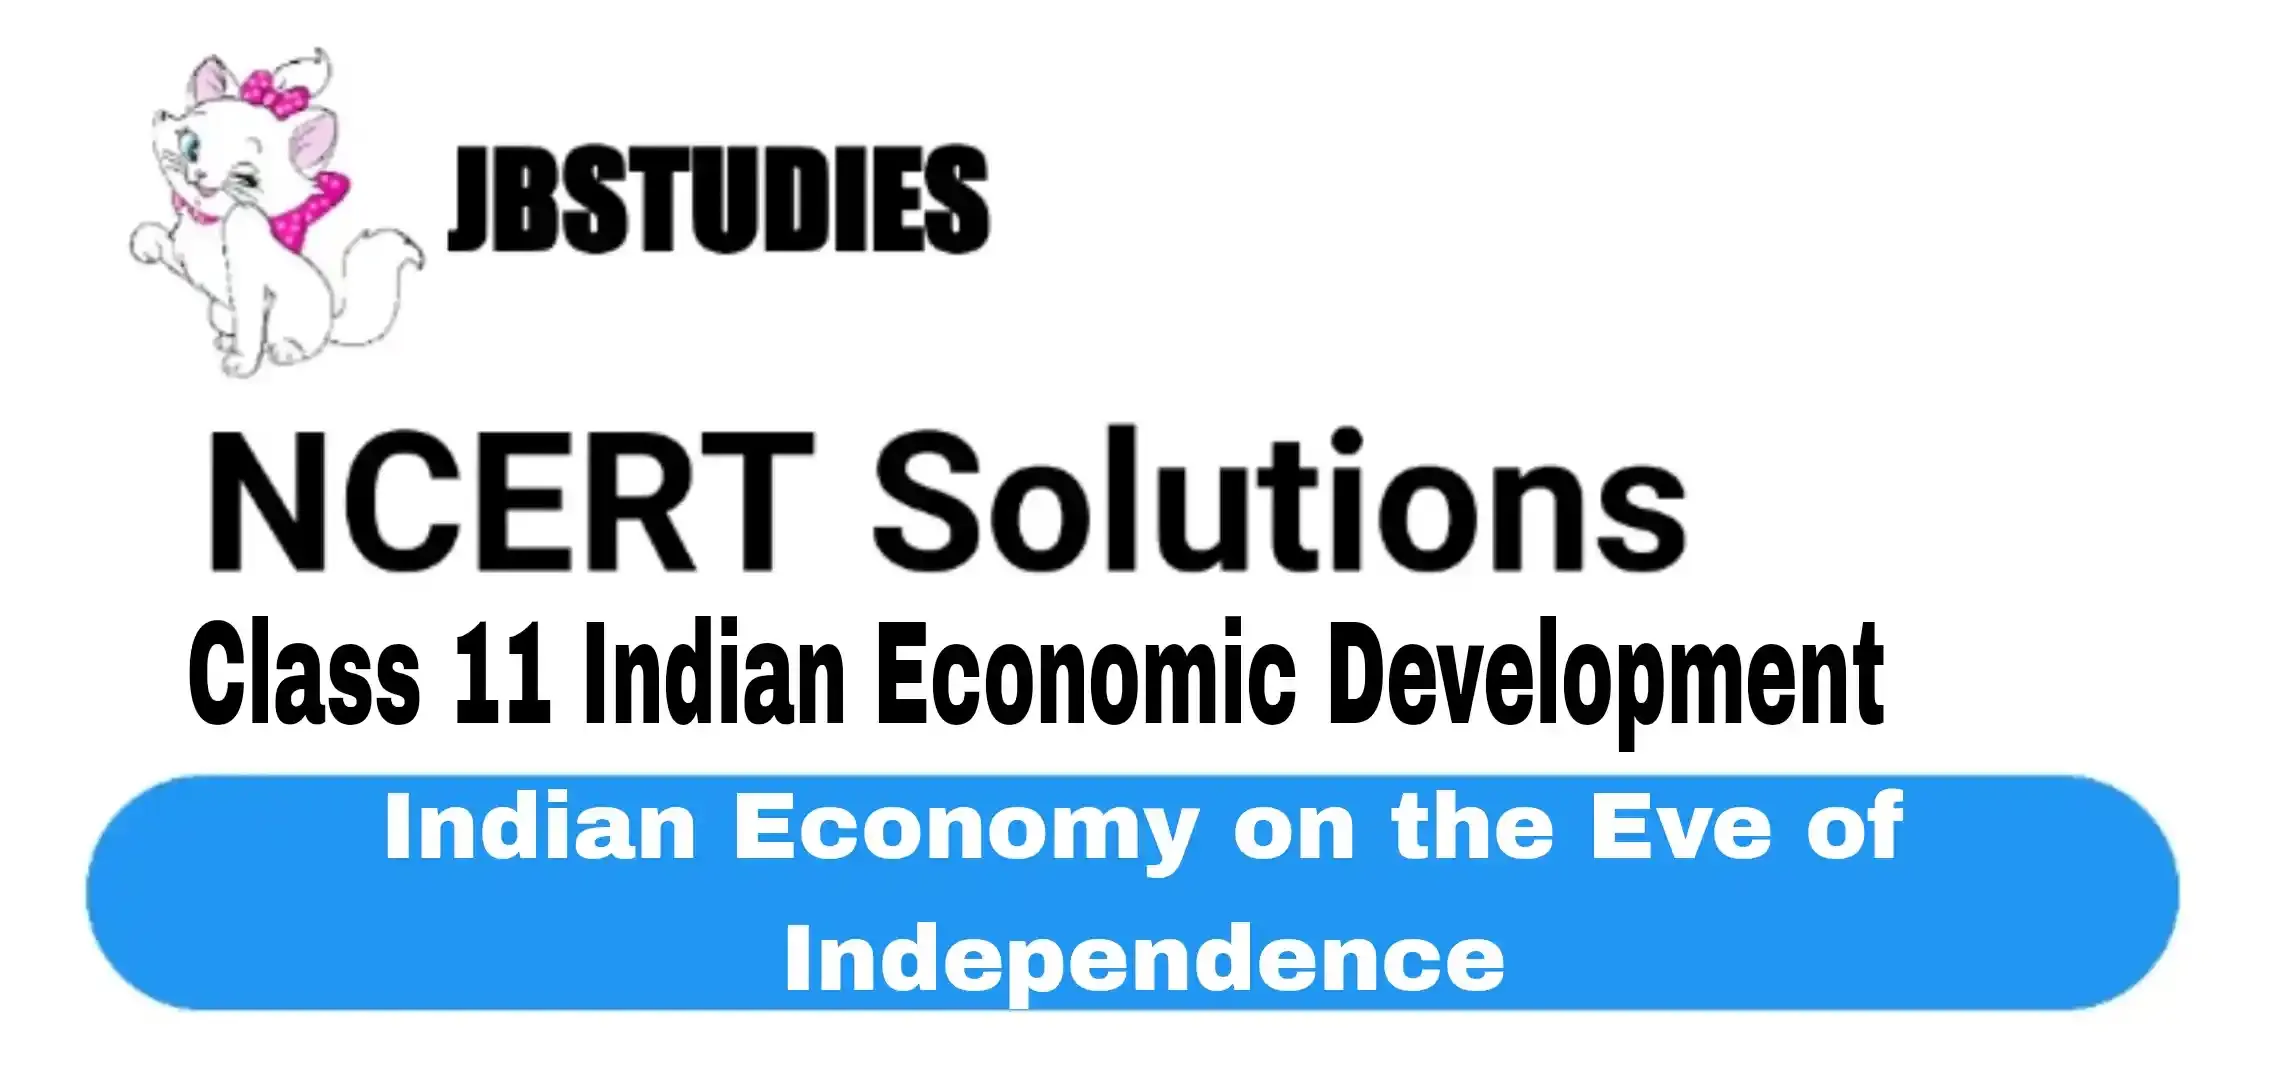 Solutions Class 11 Indian Economic Development Chapter -1 (Indian Economy on the Eve of Independence)